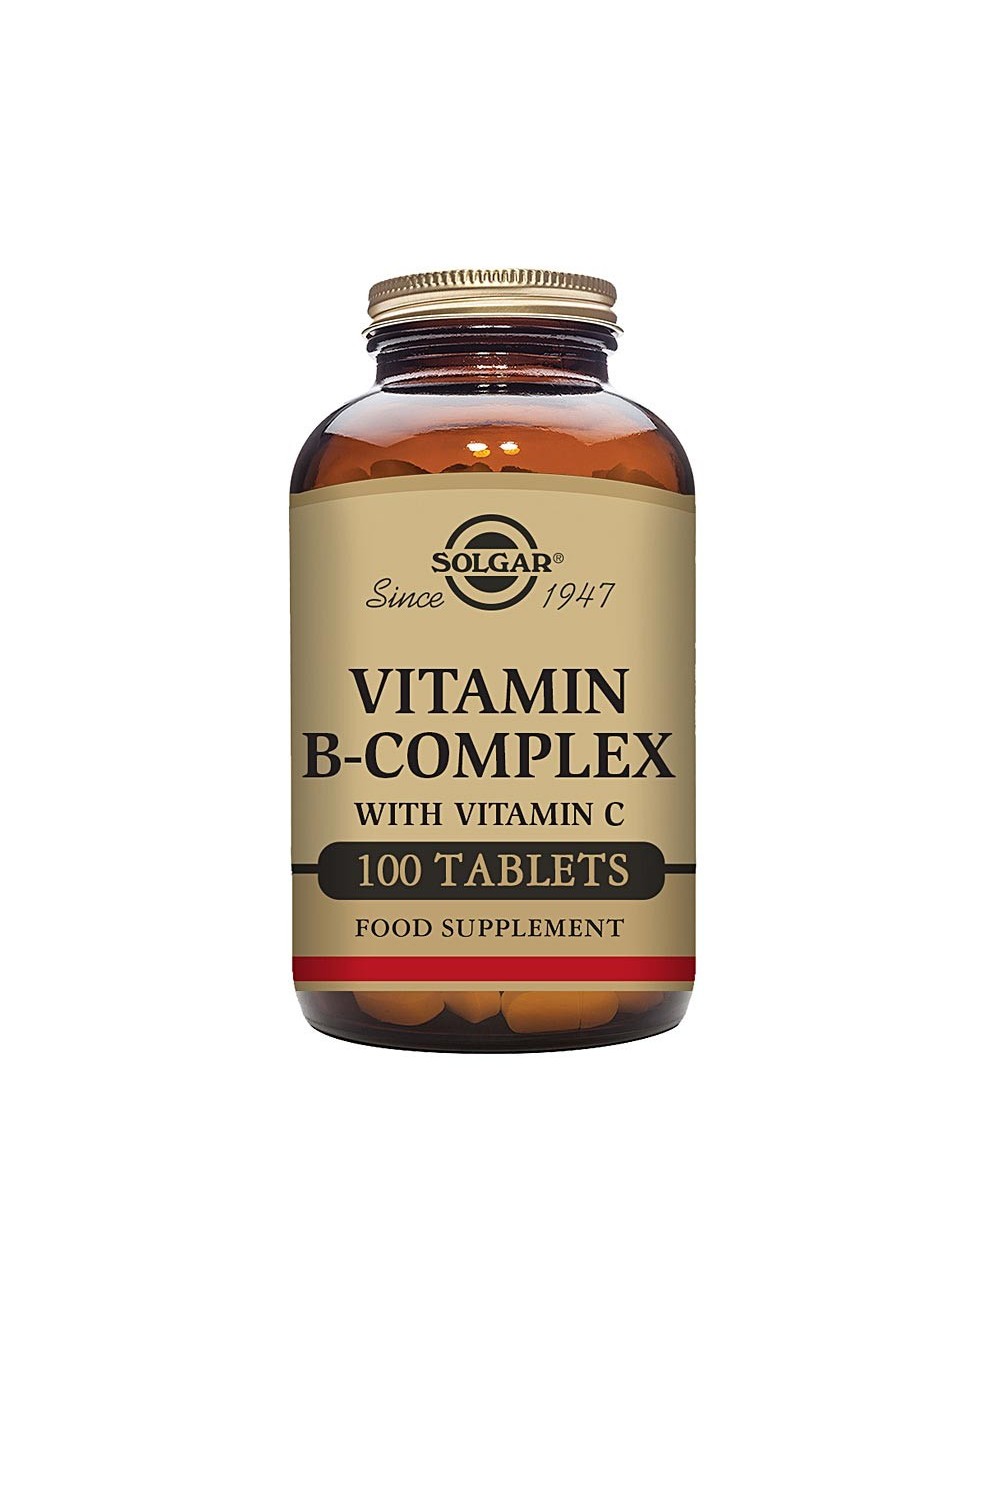 Solgar Vitamin B-Complex With Vitamin C Tablets - Pack of 100